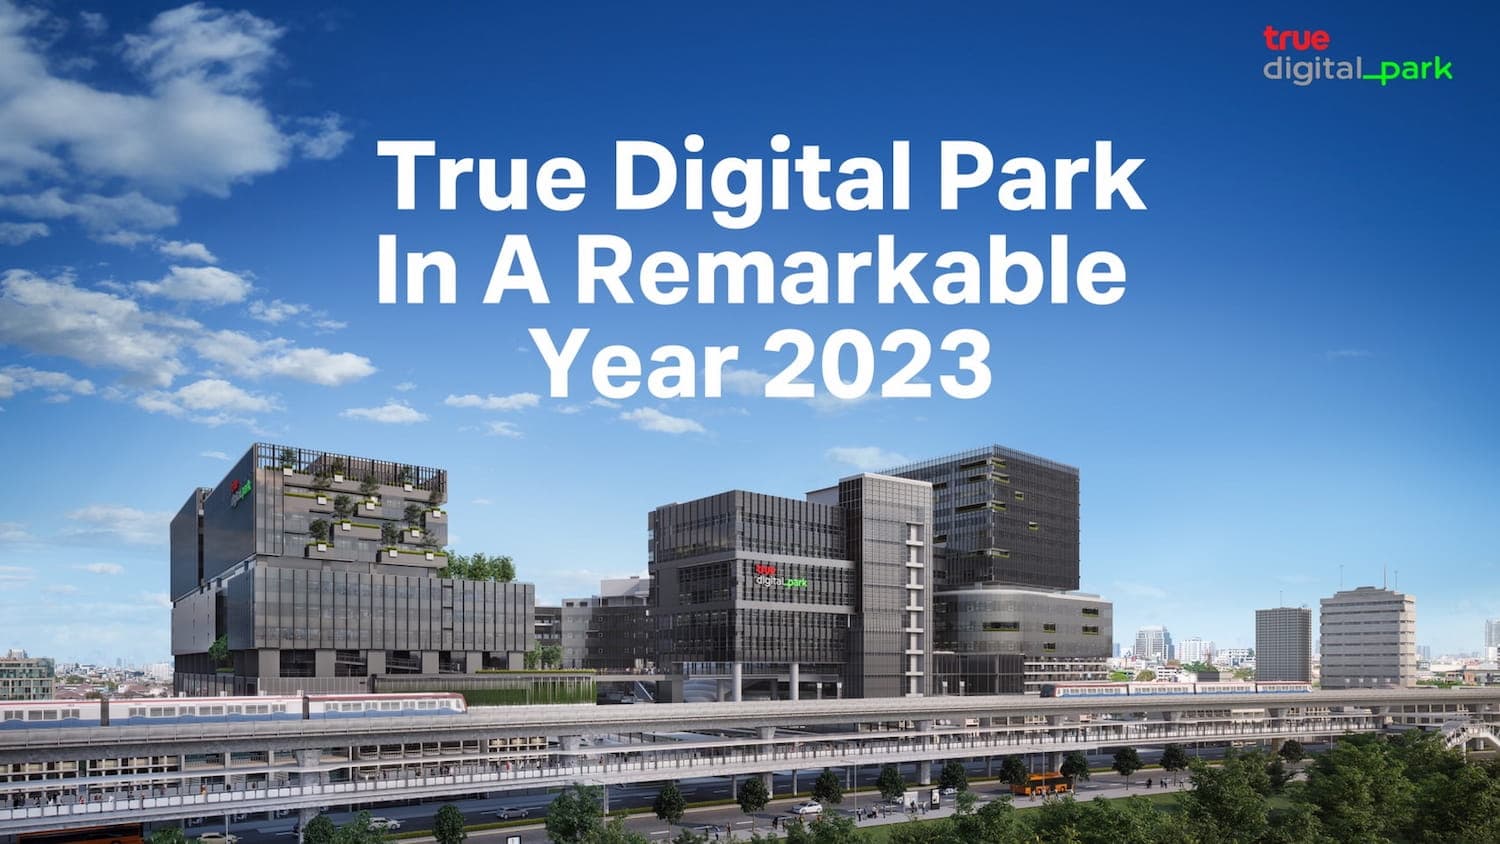 True Digital Park in a remarkable year 2023